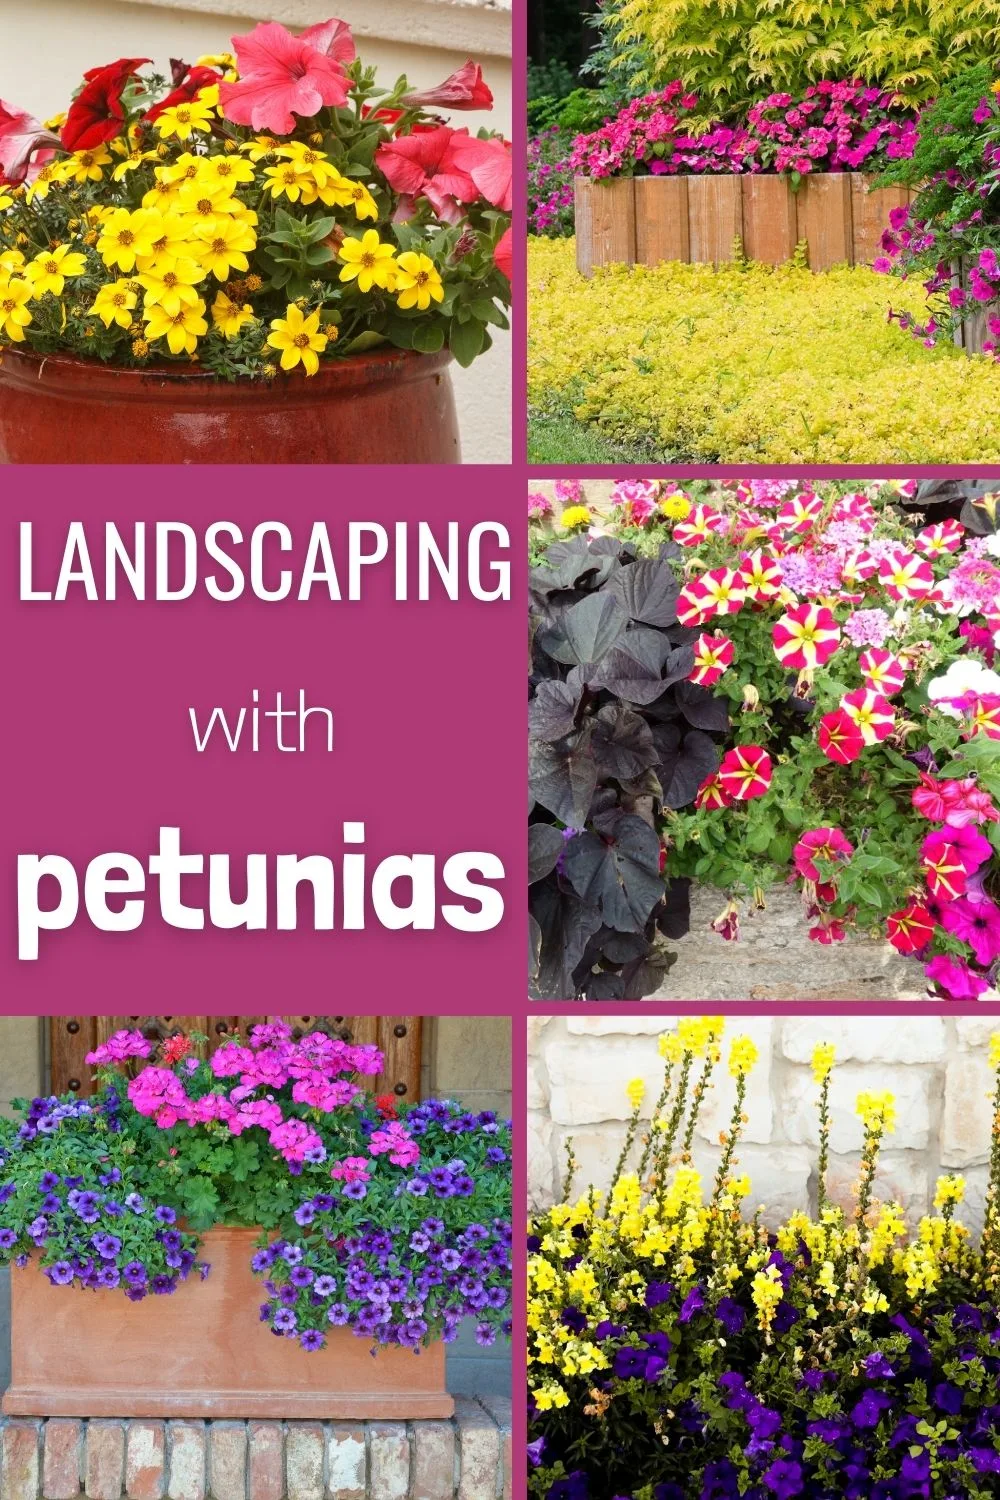 Landscaping with petunias